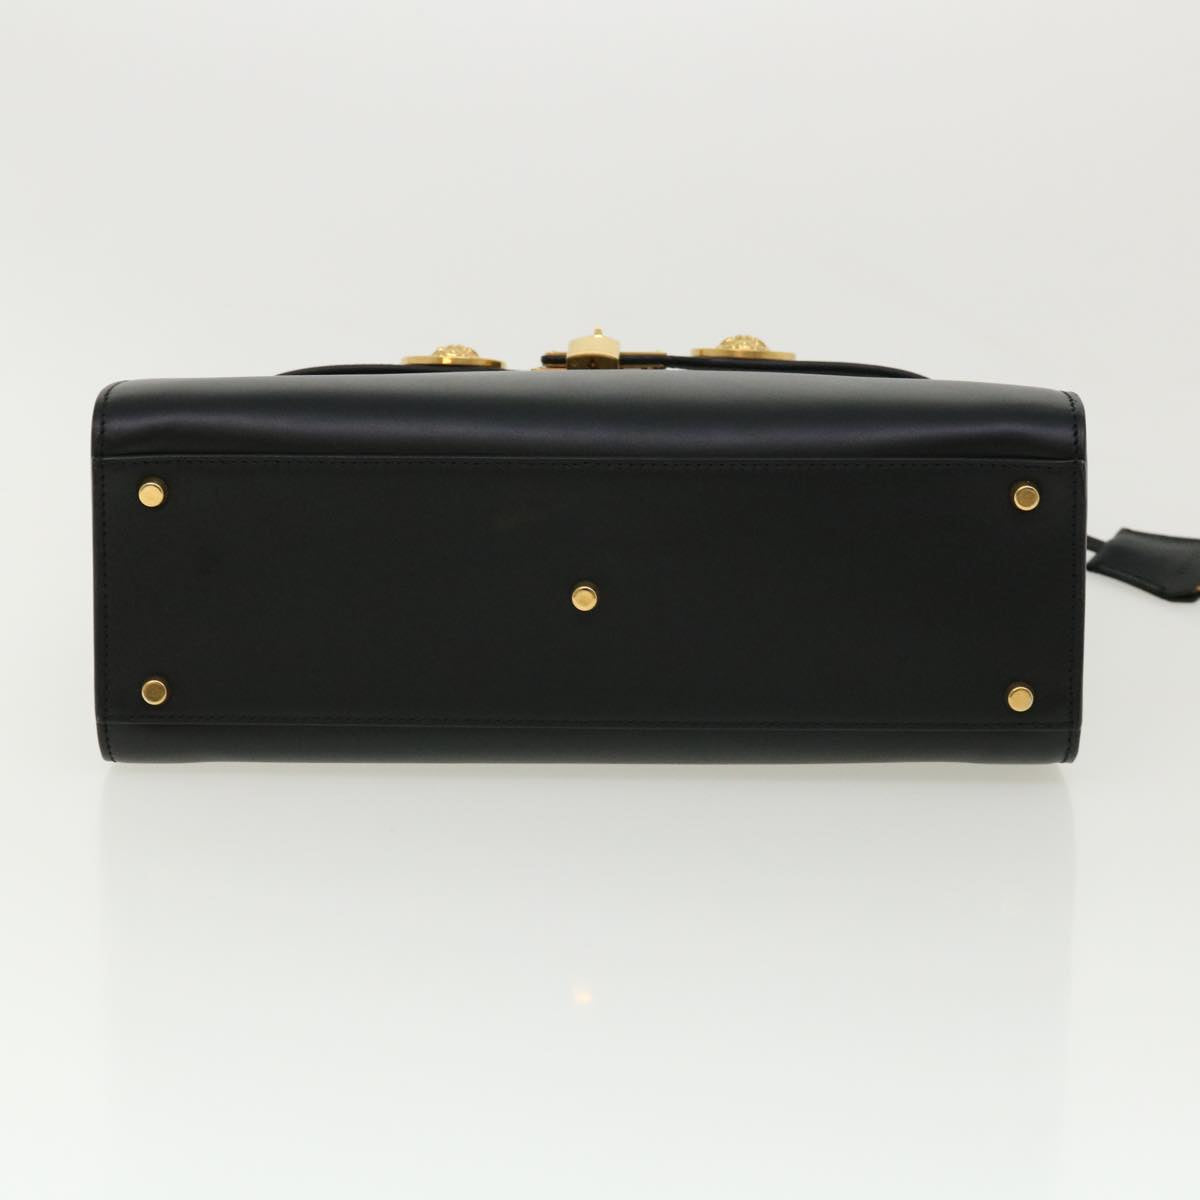 Versace Hand Bag Leather 2way Black Dbfg311 Auth 31495a